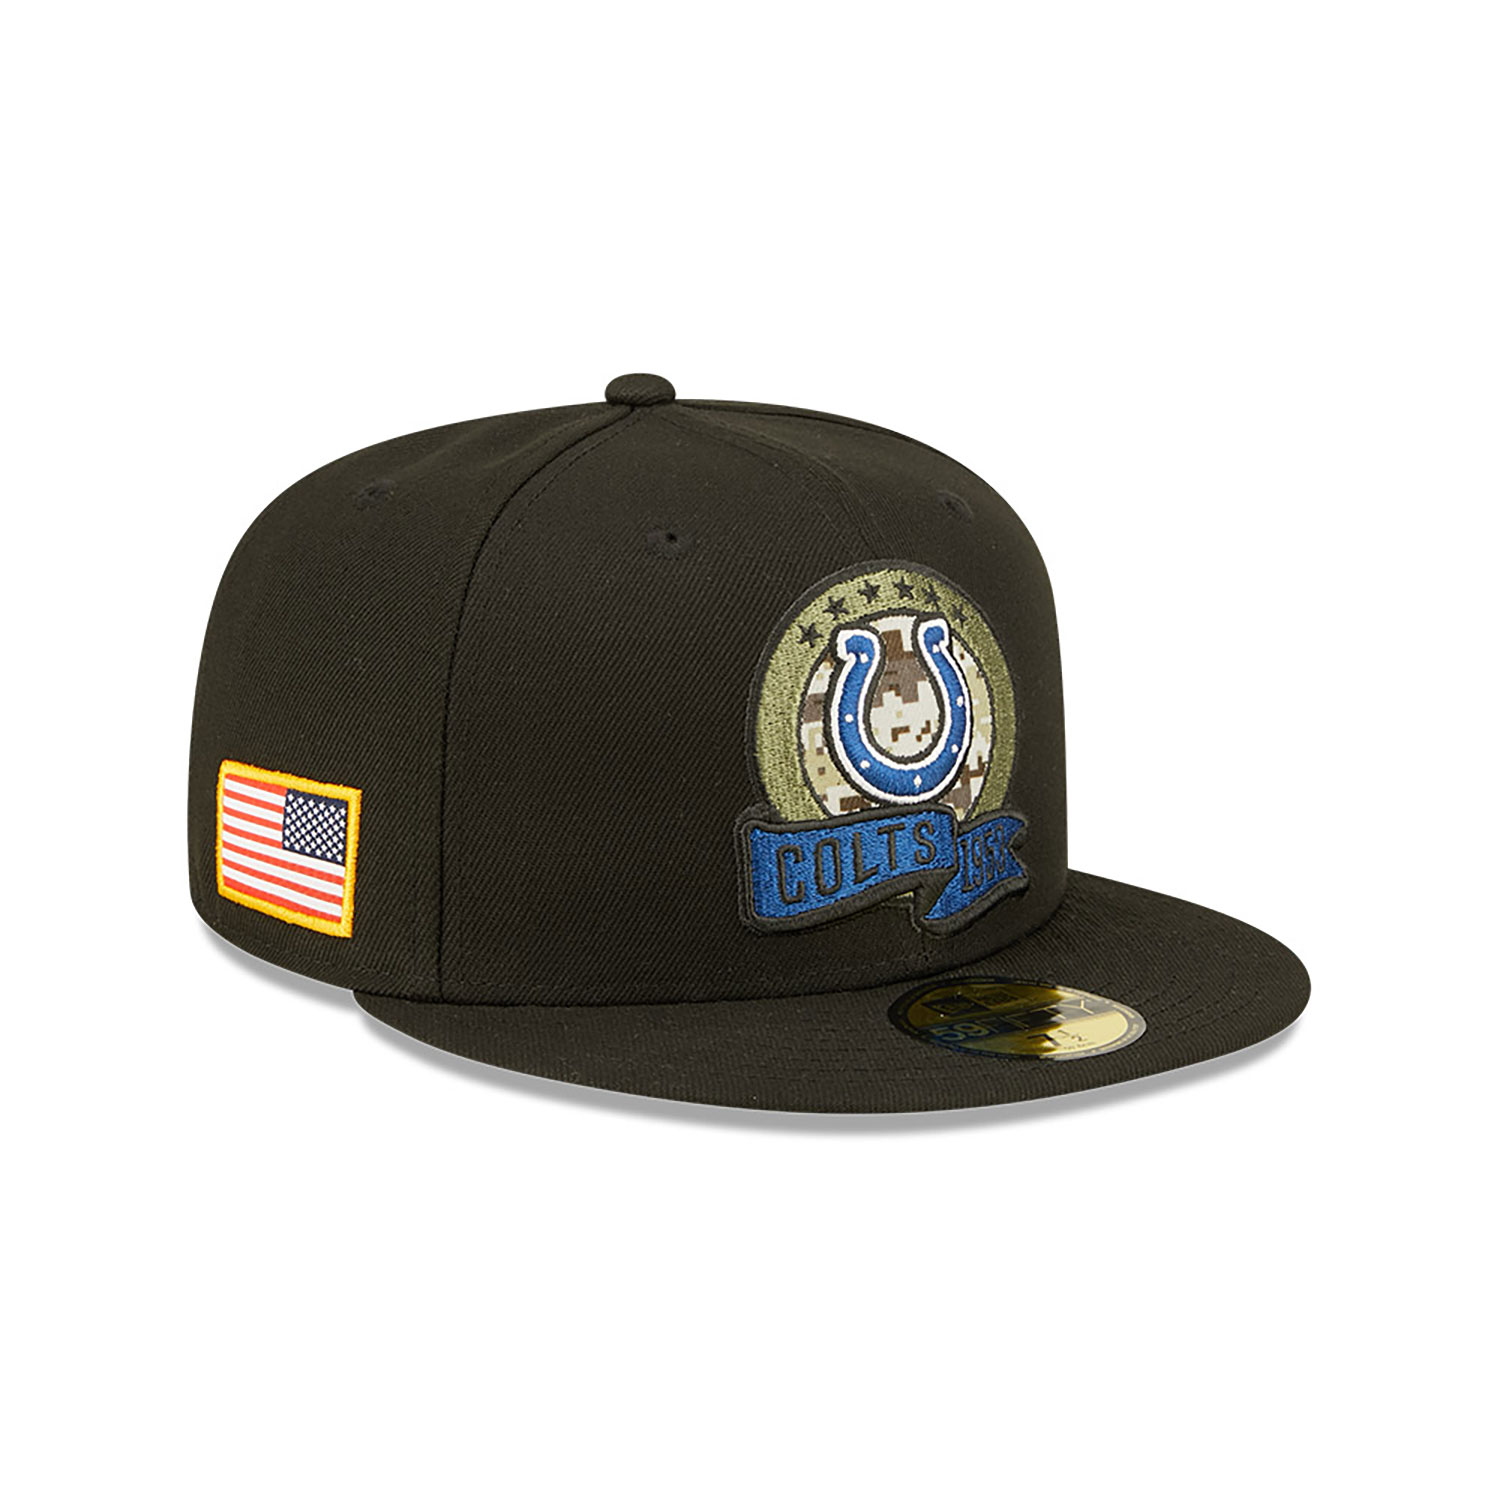 Indianapolis Colts NFL Salute to Service Black 59FIFTY Fitted Cap